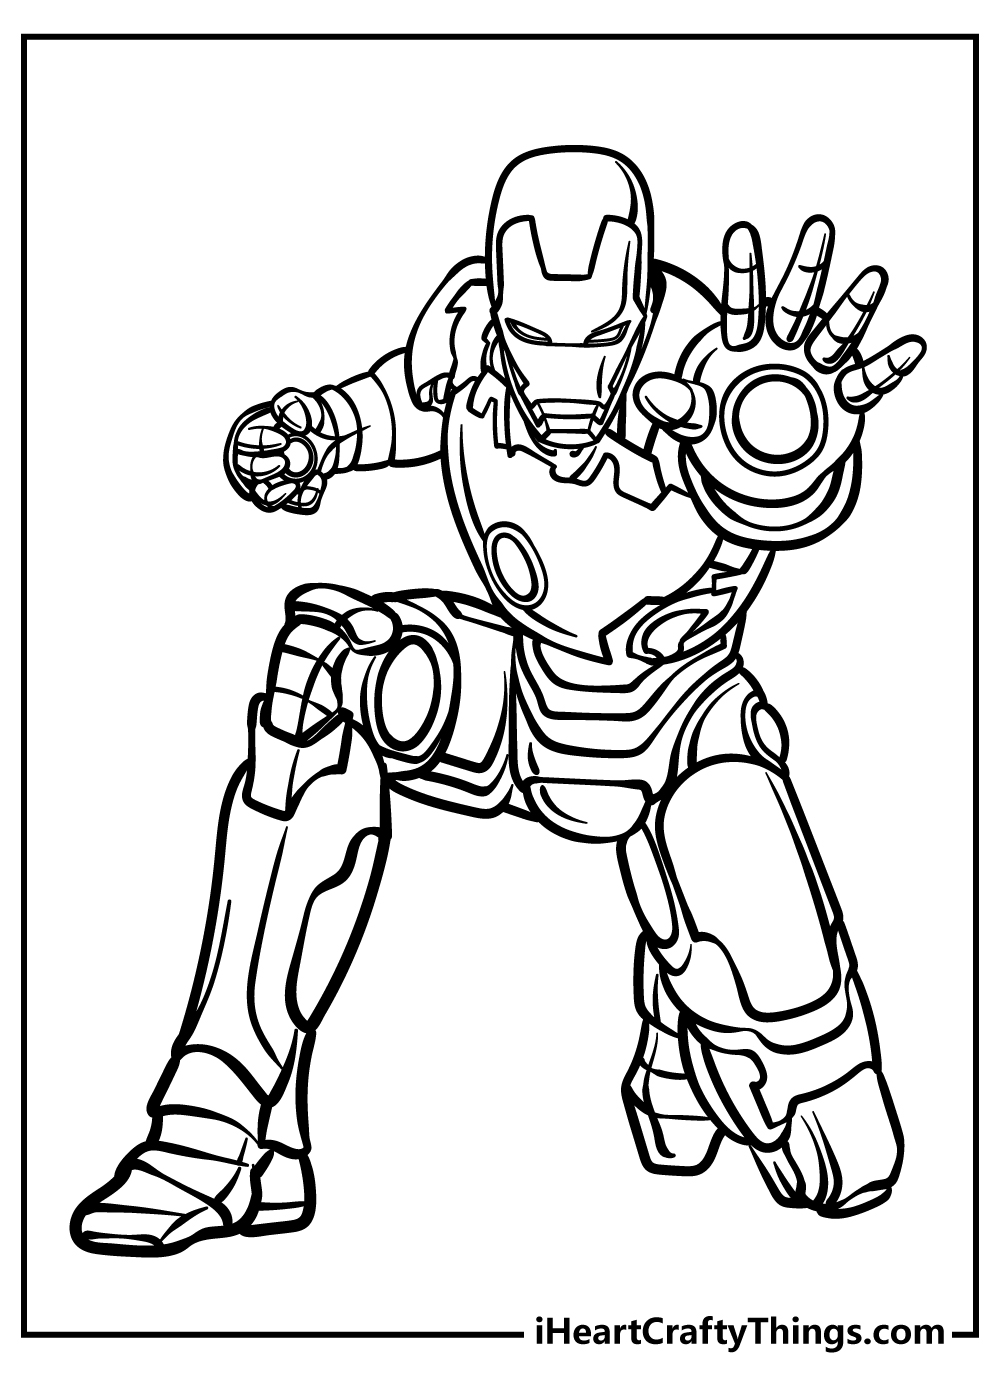 Avengers coloring pages free printables